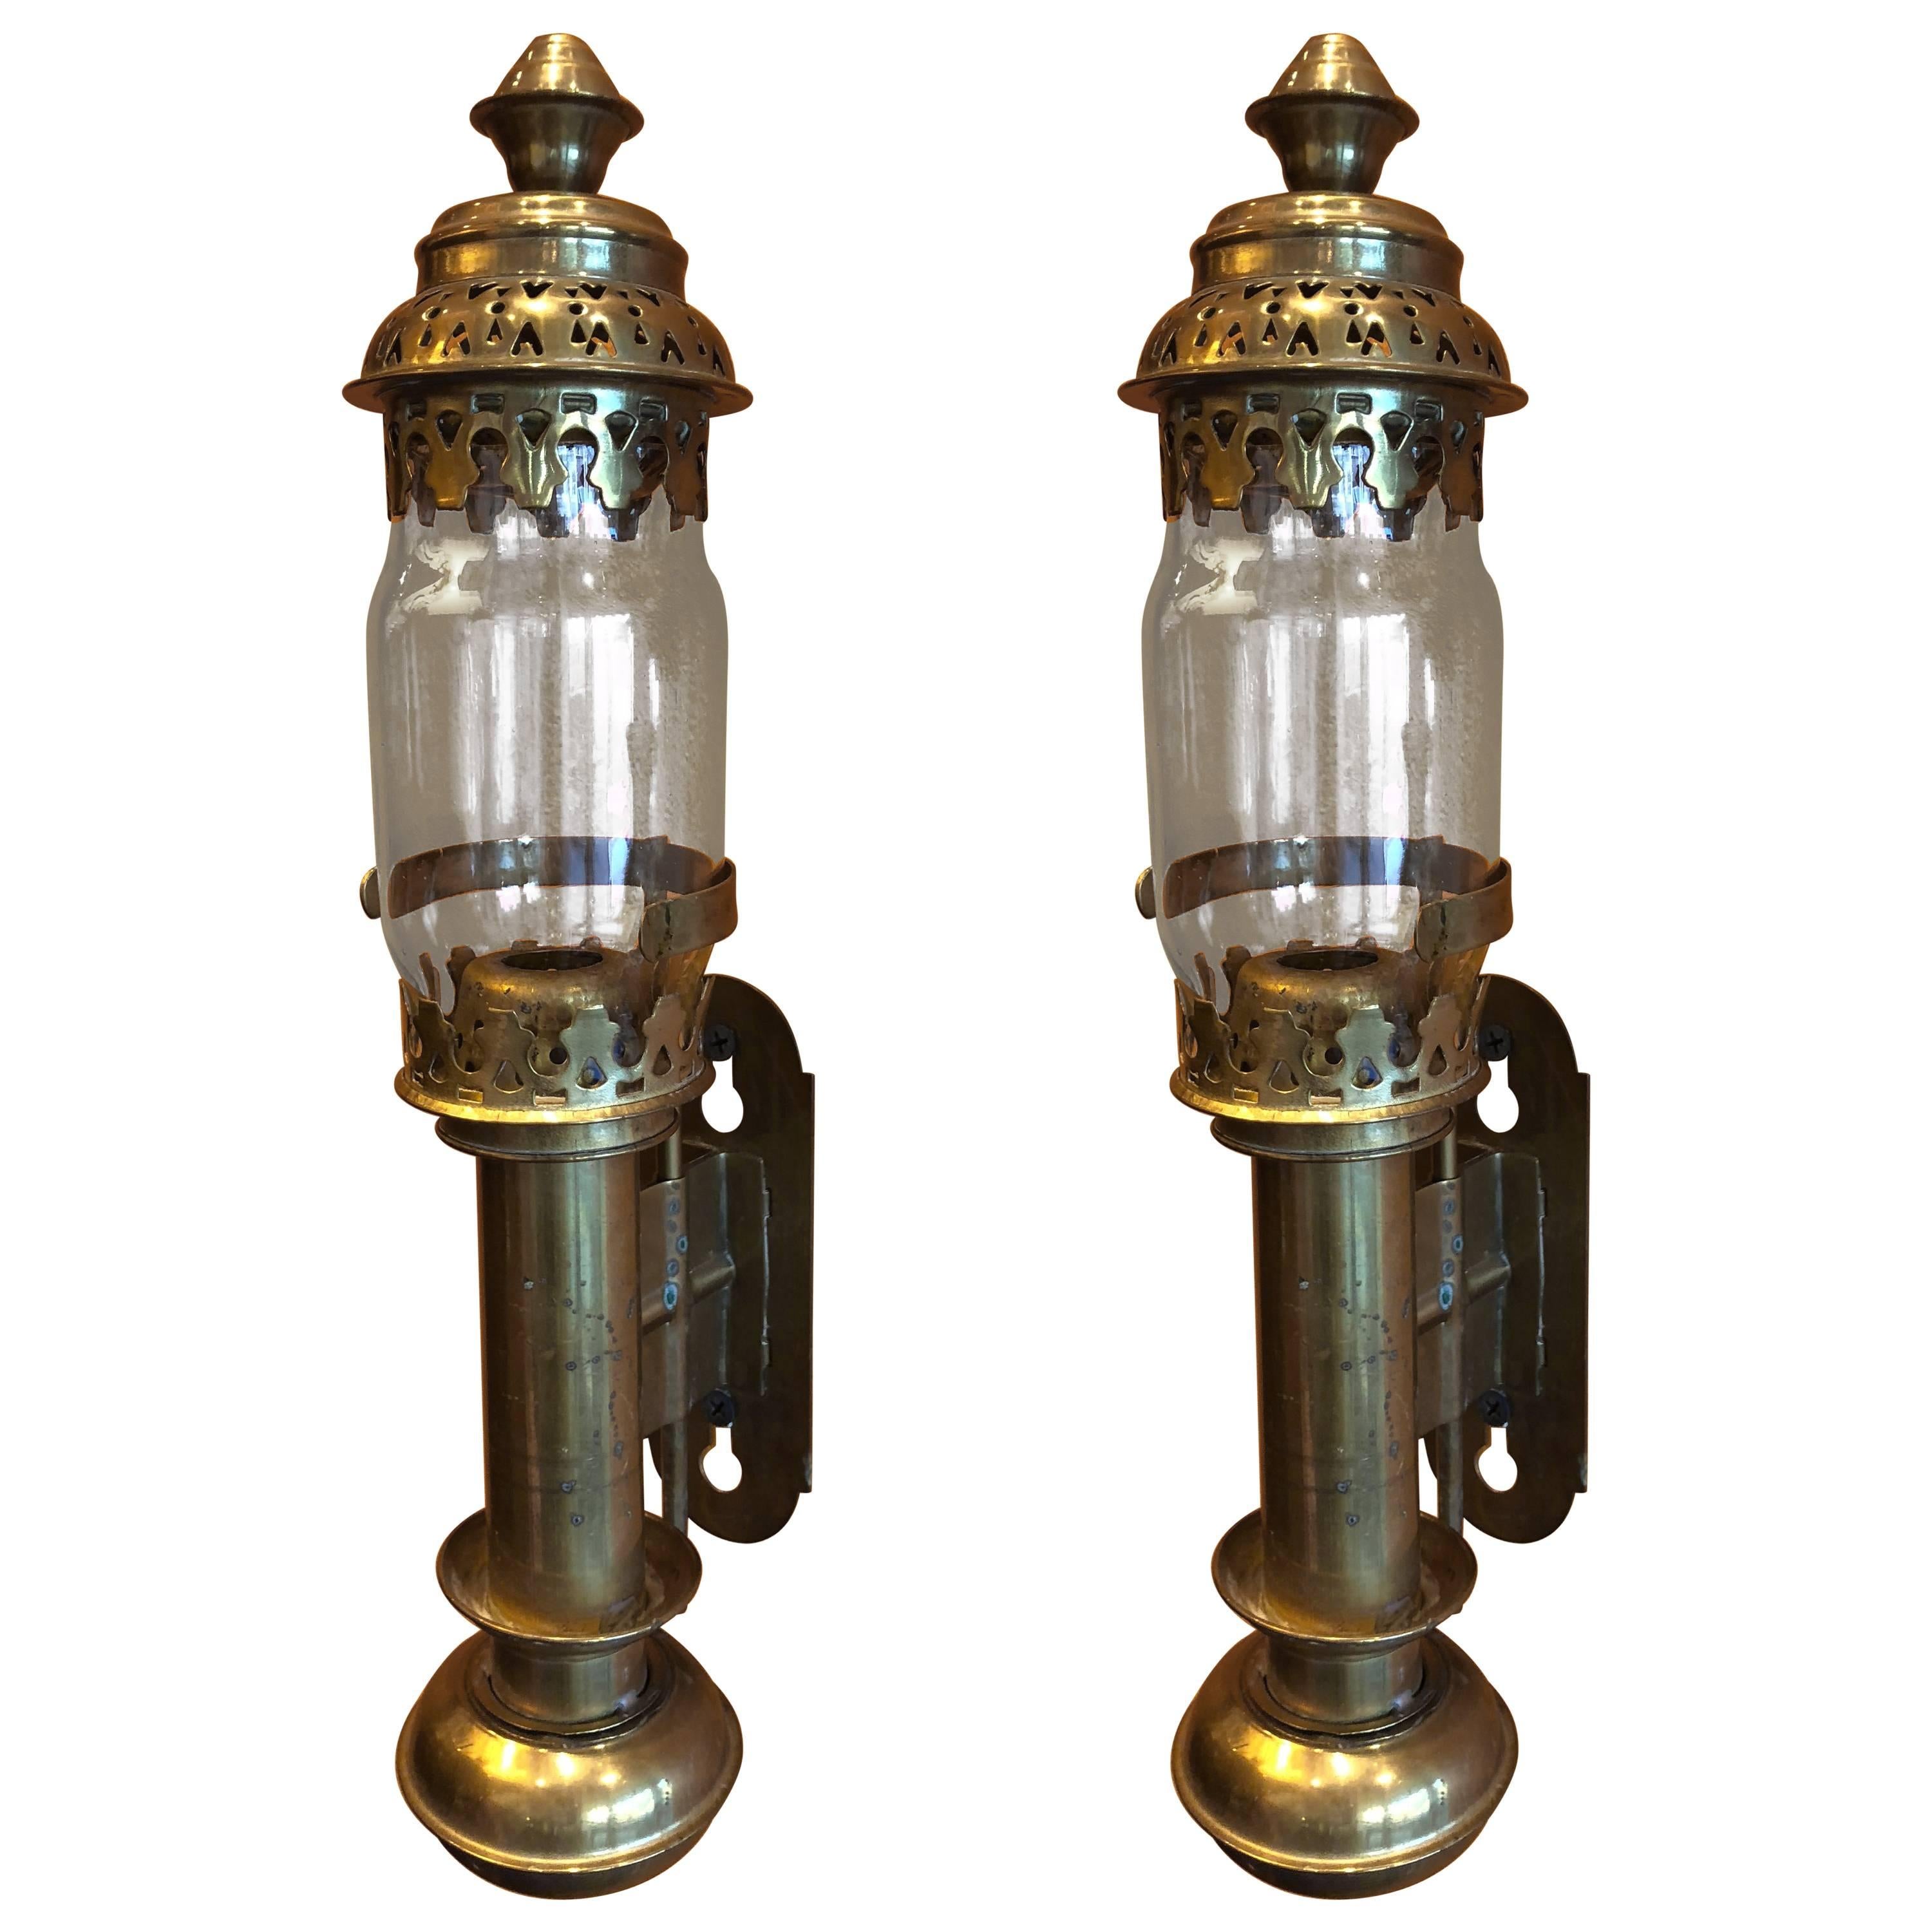 Small Brass Railway or Ship Passageway Oil Lamps